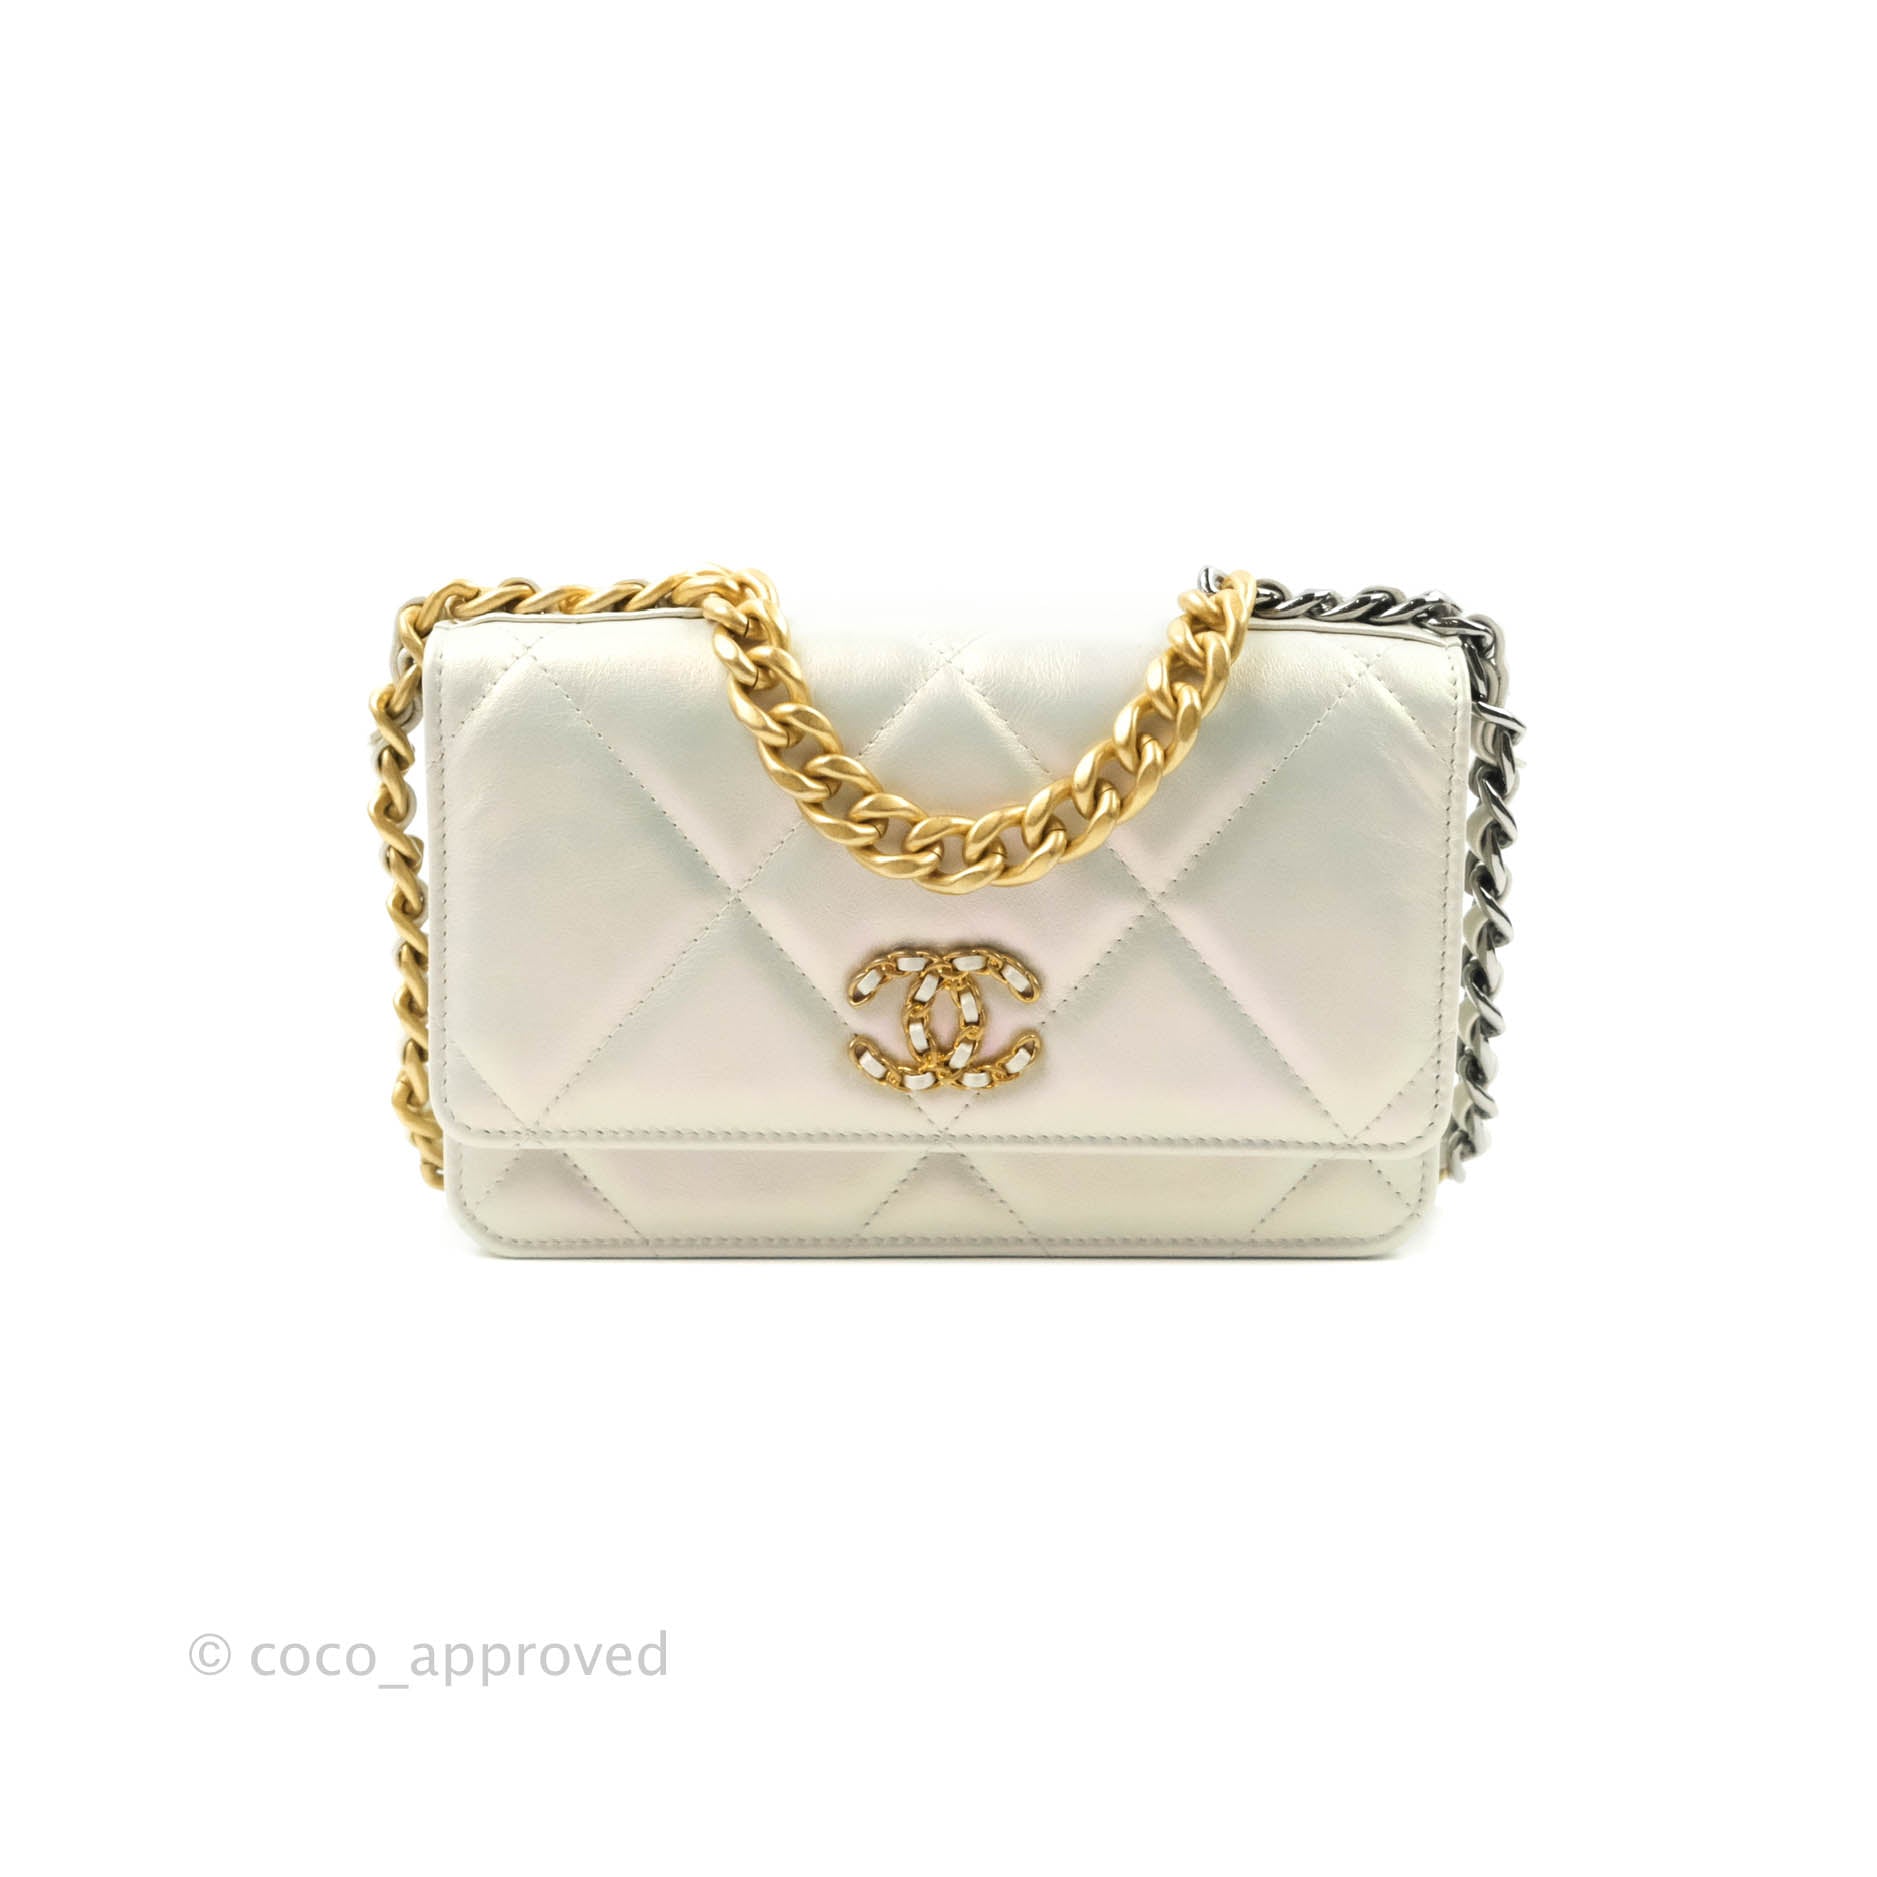 Chanel 19 Small Iridescent White Mixed Hardware – Coco Approved Studio